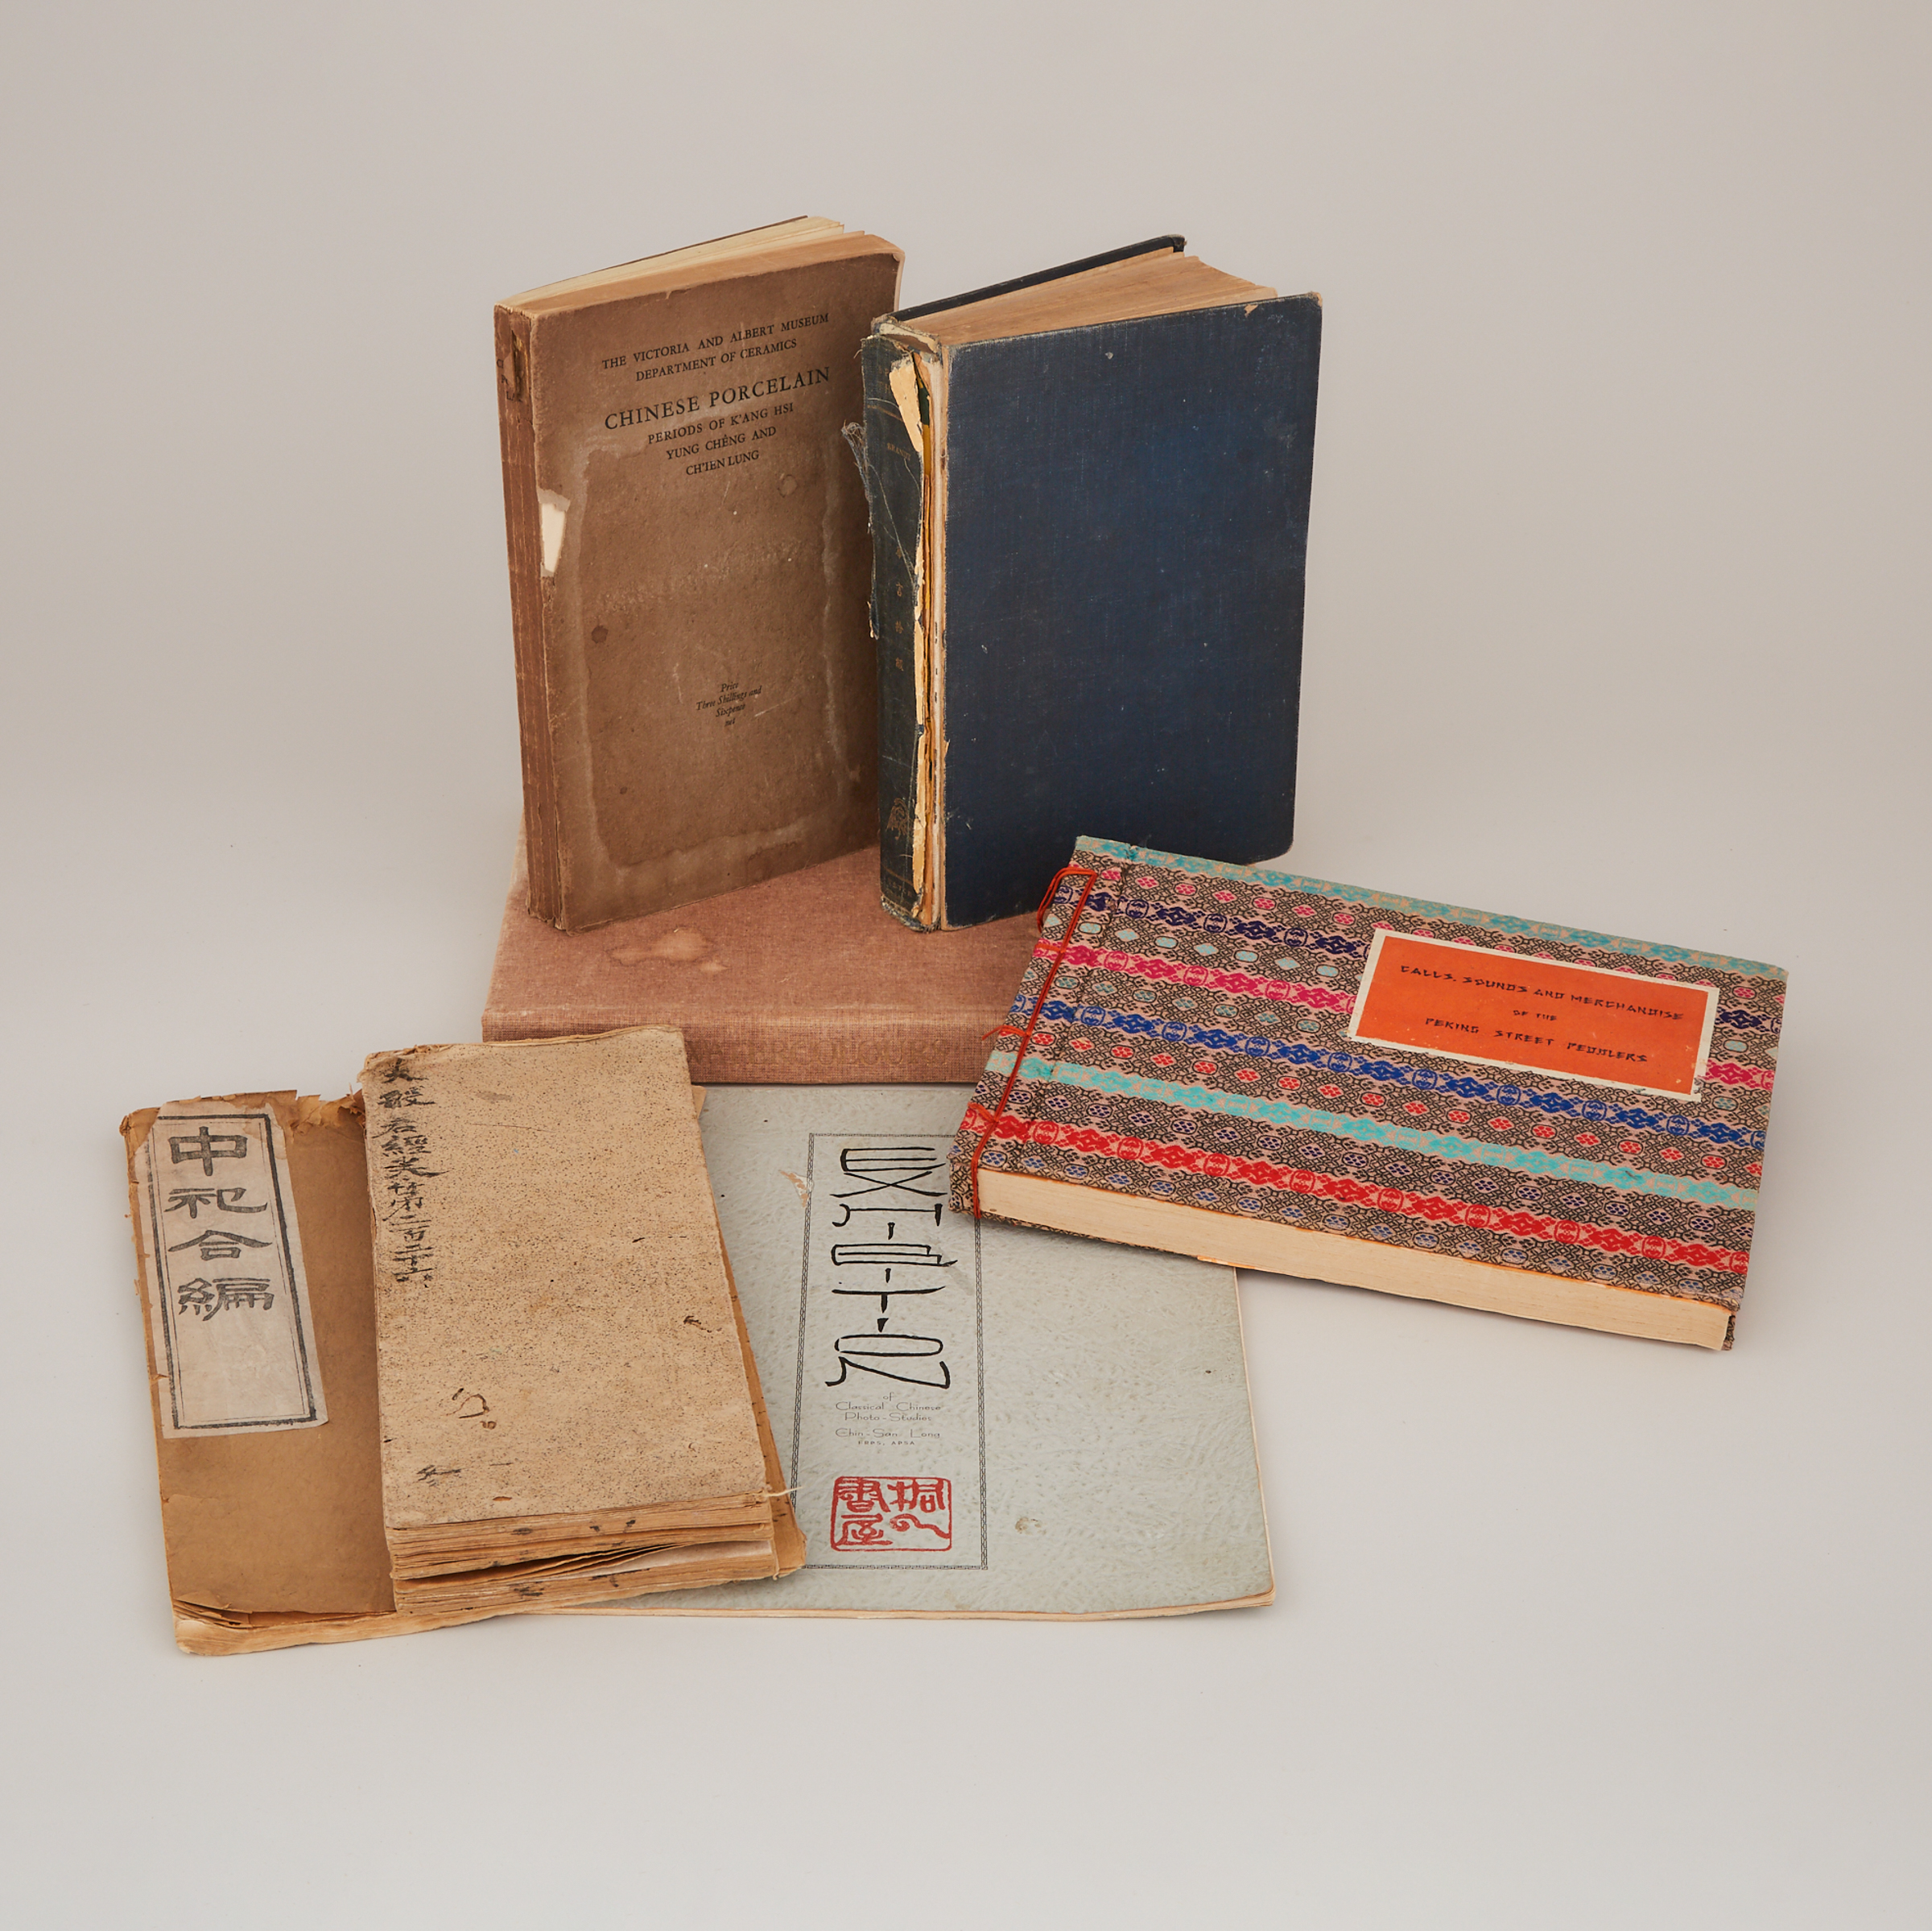 A Group of Seven Chinese Reference Books, Early to Mid-20th Century